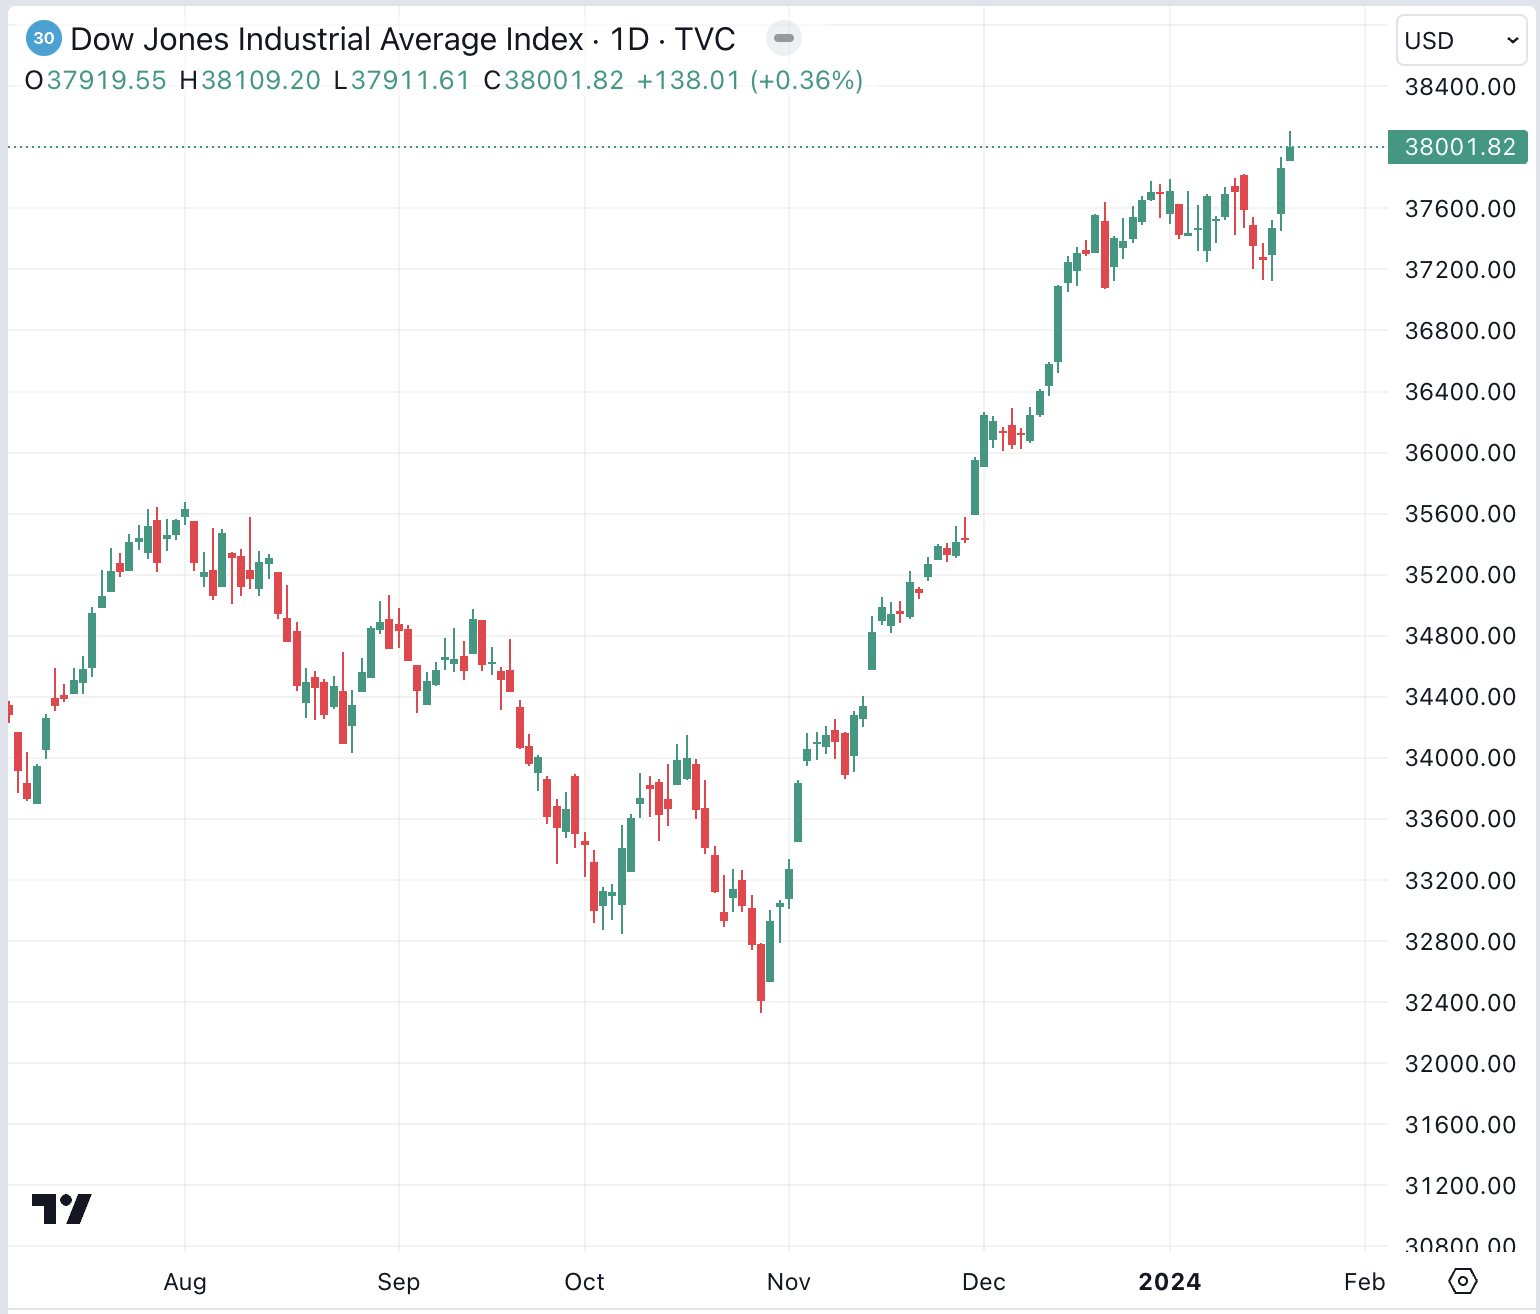 The Kobeissi Letter on X: "BREAKING: The Dow Jones Industrial Average just  closed above 38,000 for the first time in history. The S&P 500 has also  closed at a new all time